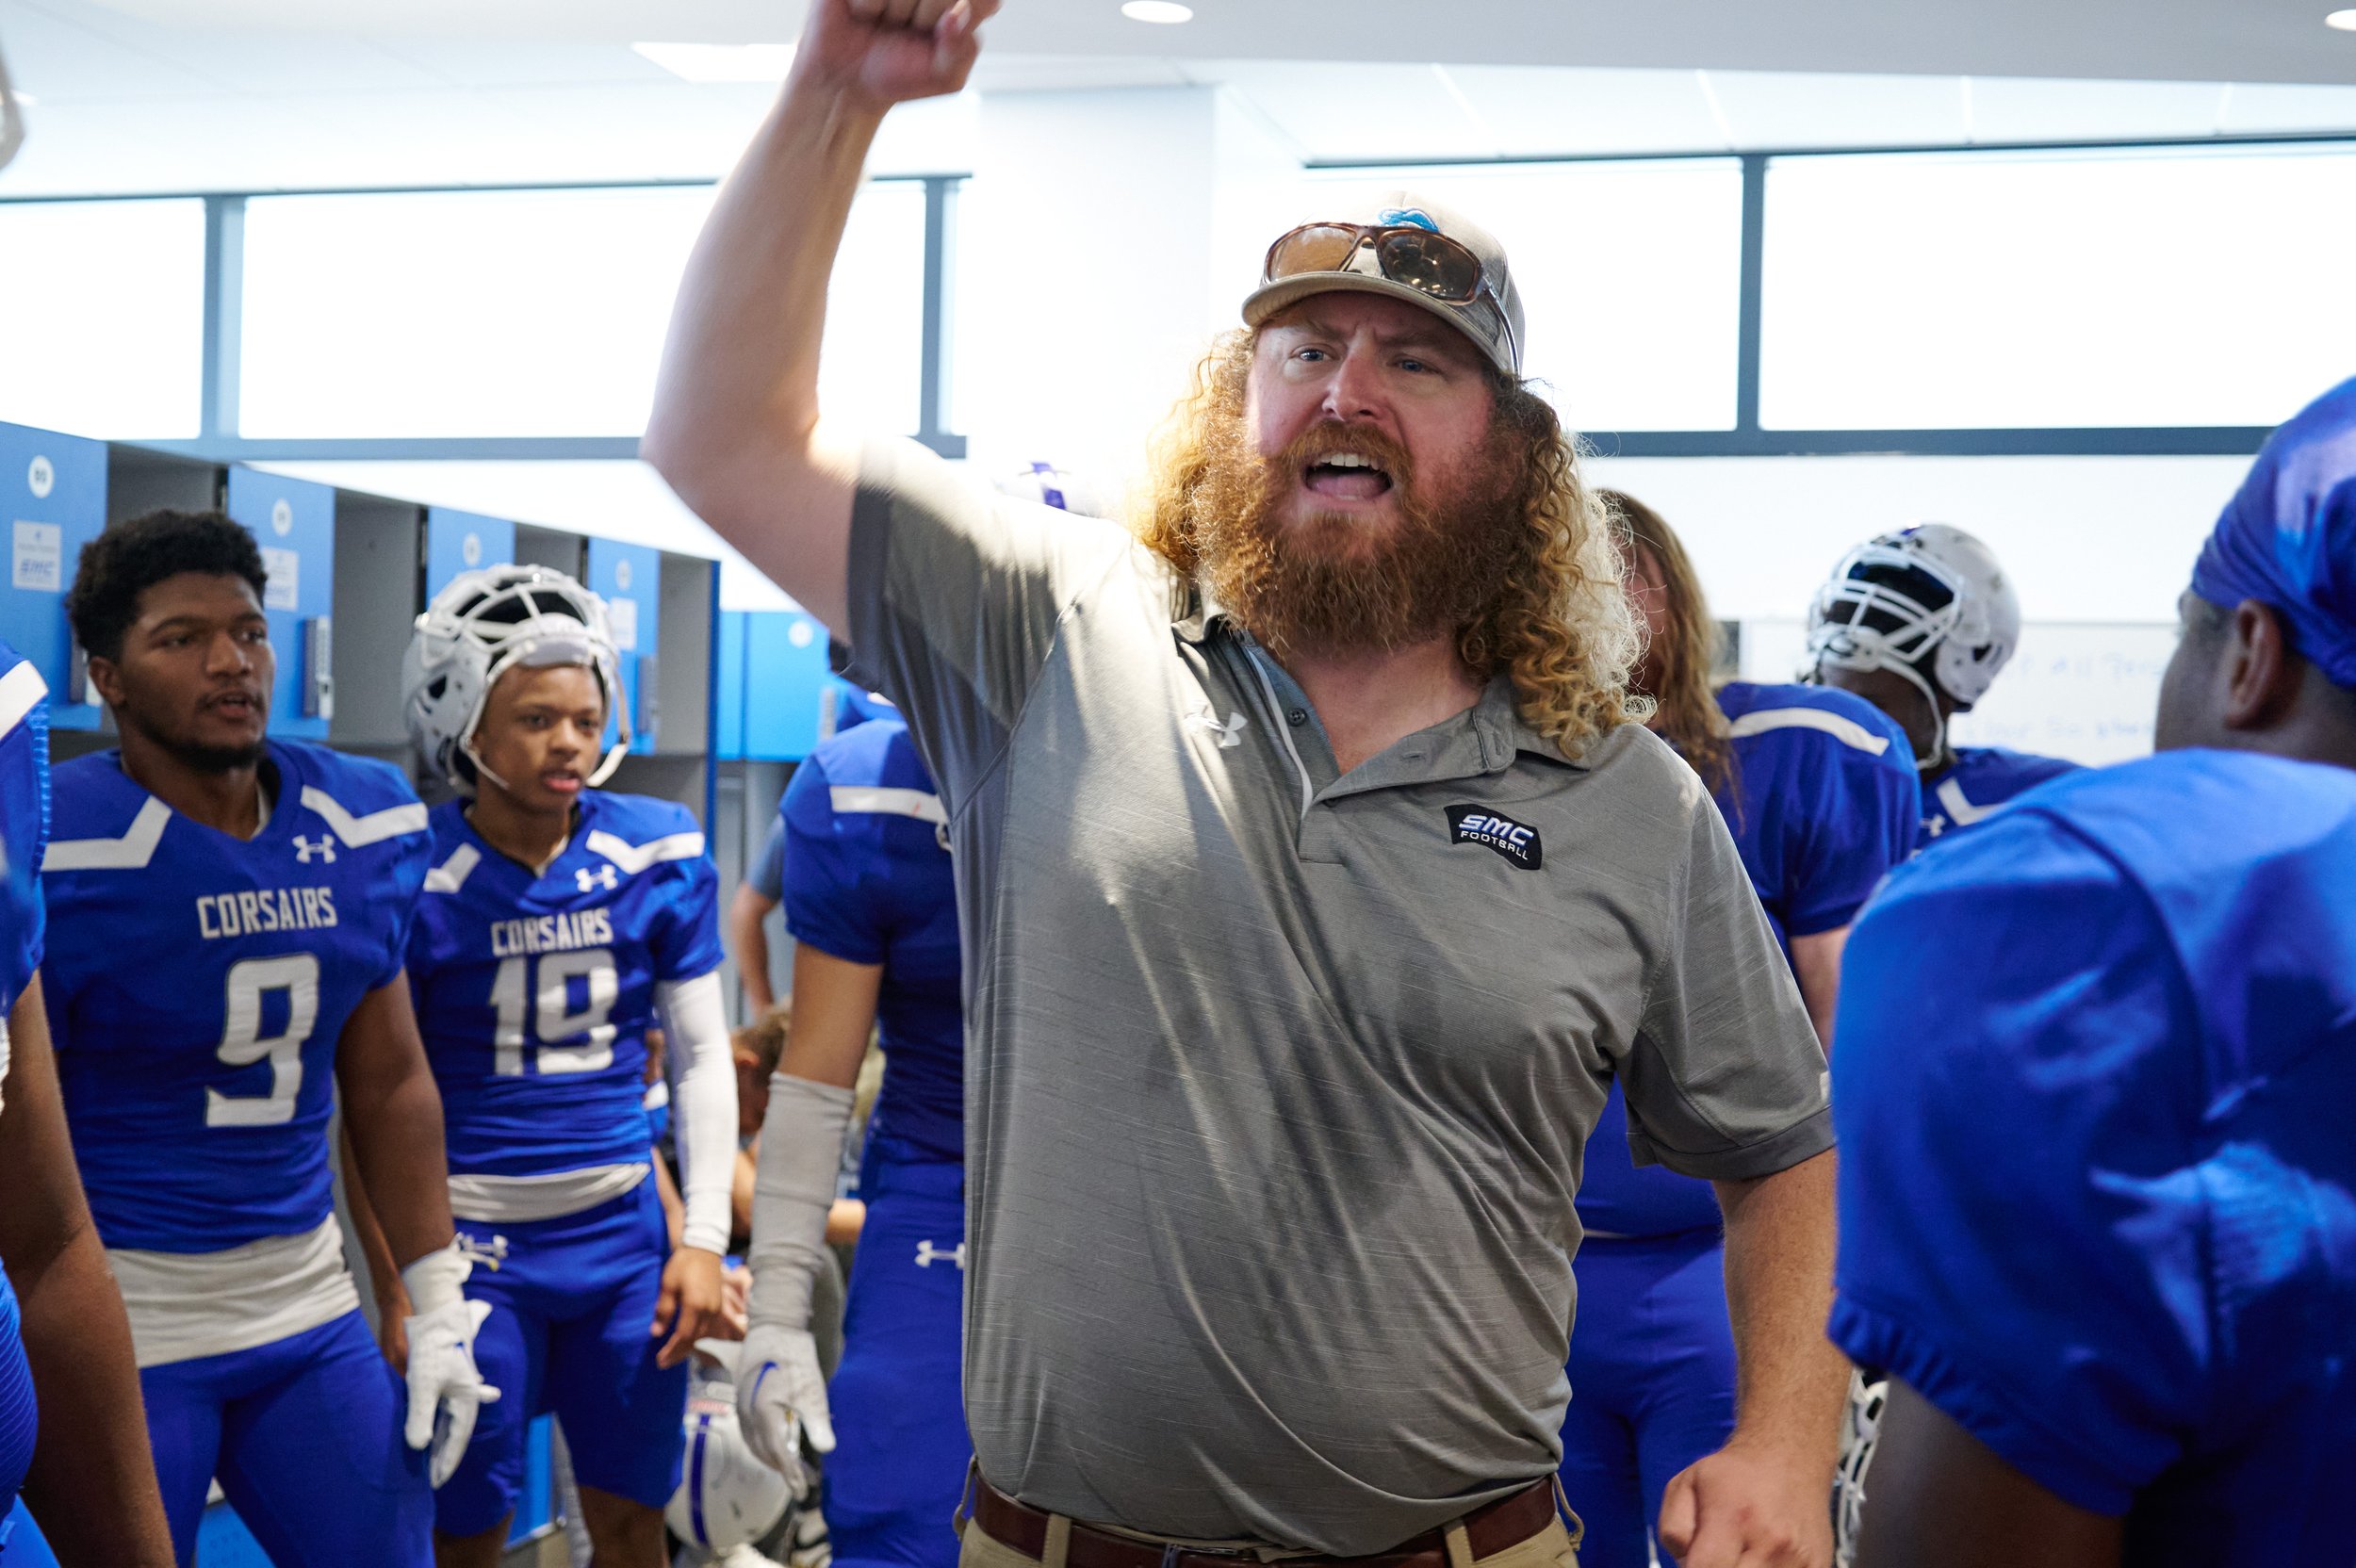  Santa Monica College Head Football Coach Kelly Ledwith revs up the team in the locker room upon heading out to begin the third quarter during the football match against the West Los Angeles College Wildcats on Saturday, October 1, 2022, at Corsair F